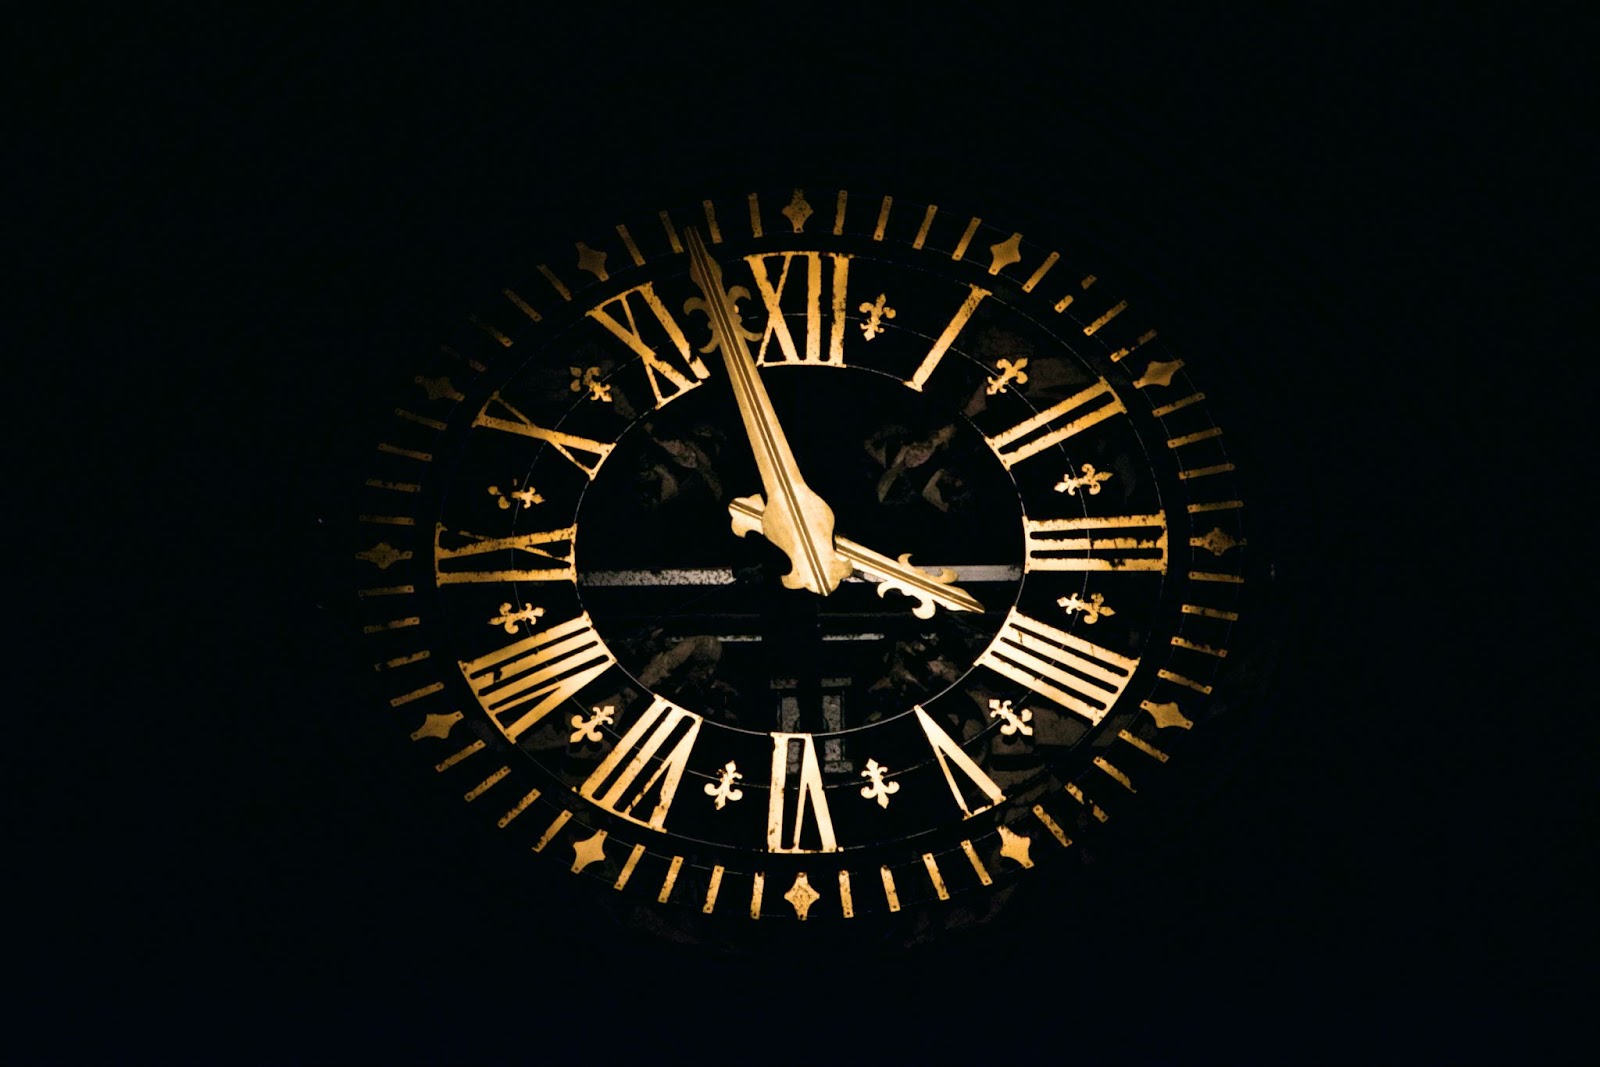 A glowing, golden clock showing the hours in roman numerals set against a black background.